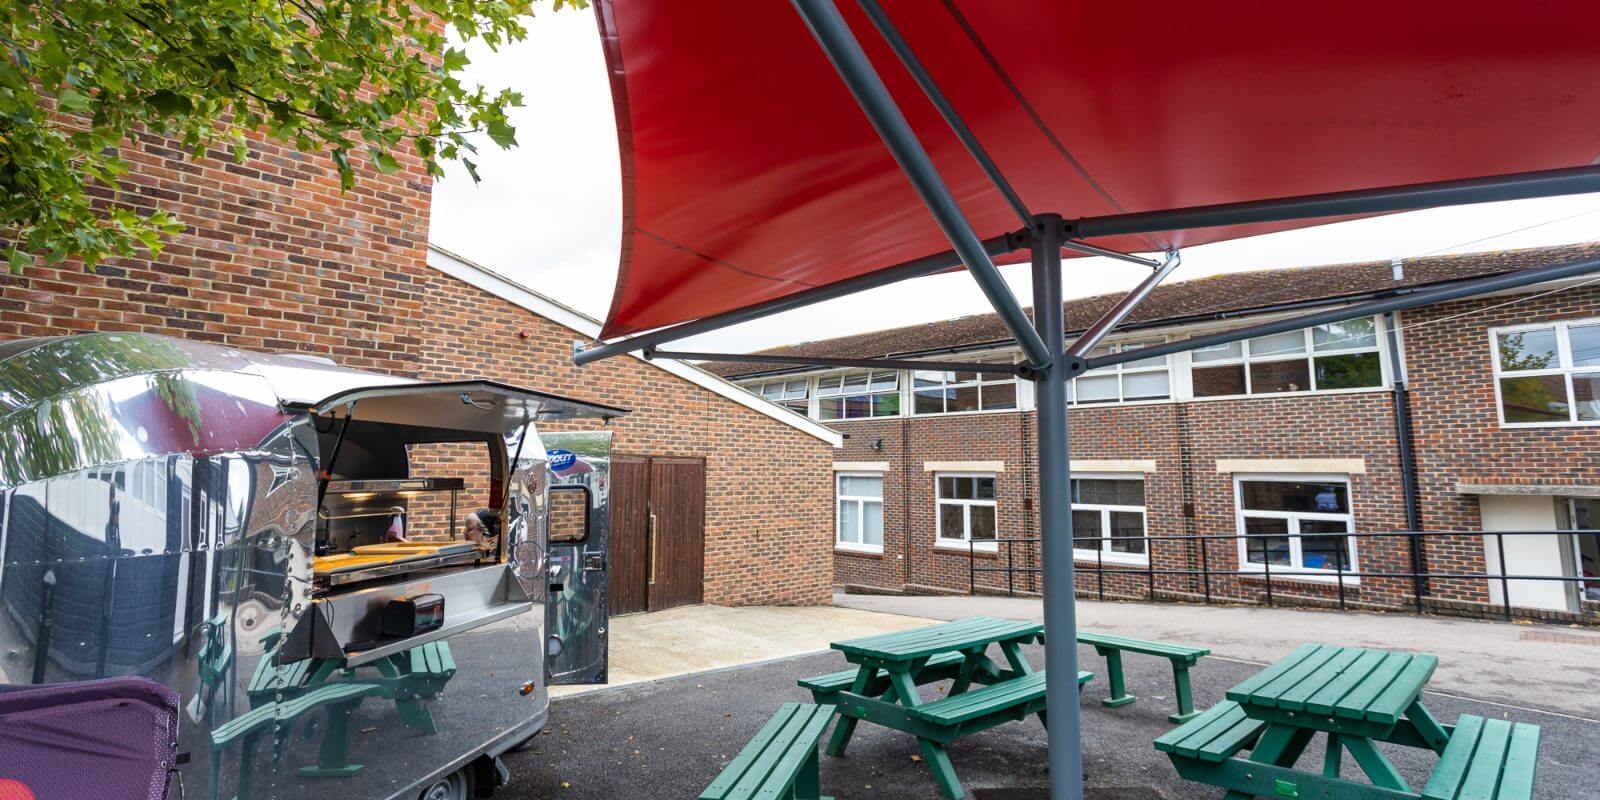 Dining area shelter we designed for Hill View School for Girls